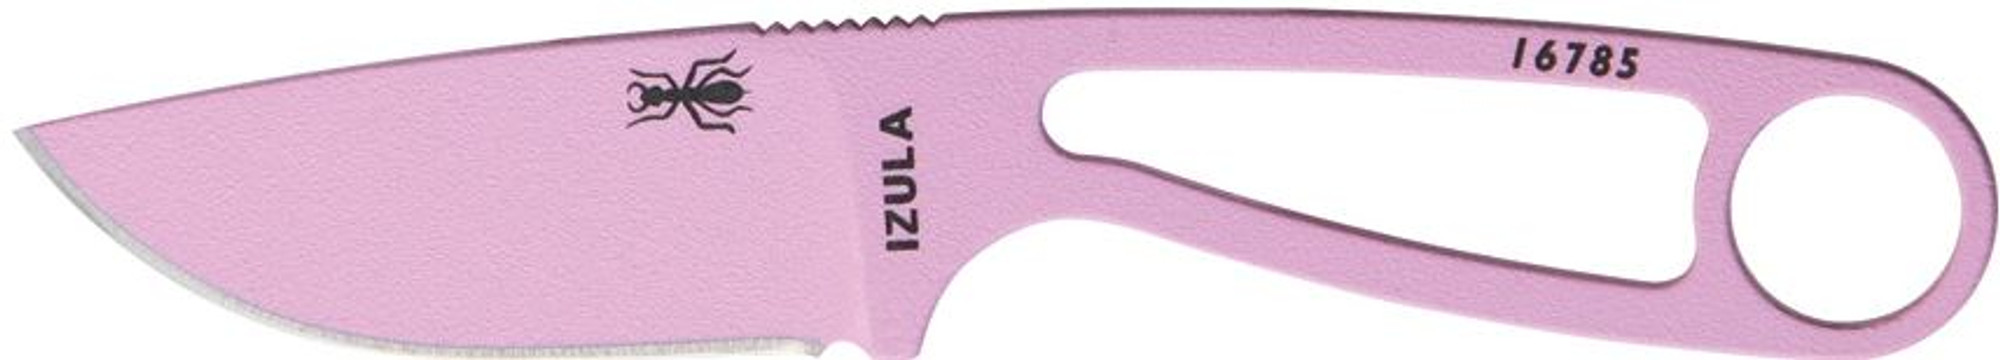 ESEE Izula - Pink with KIT